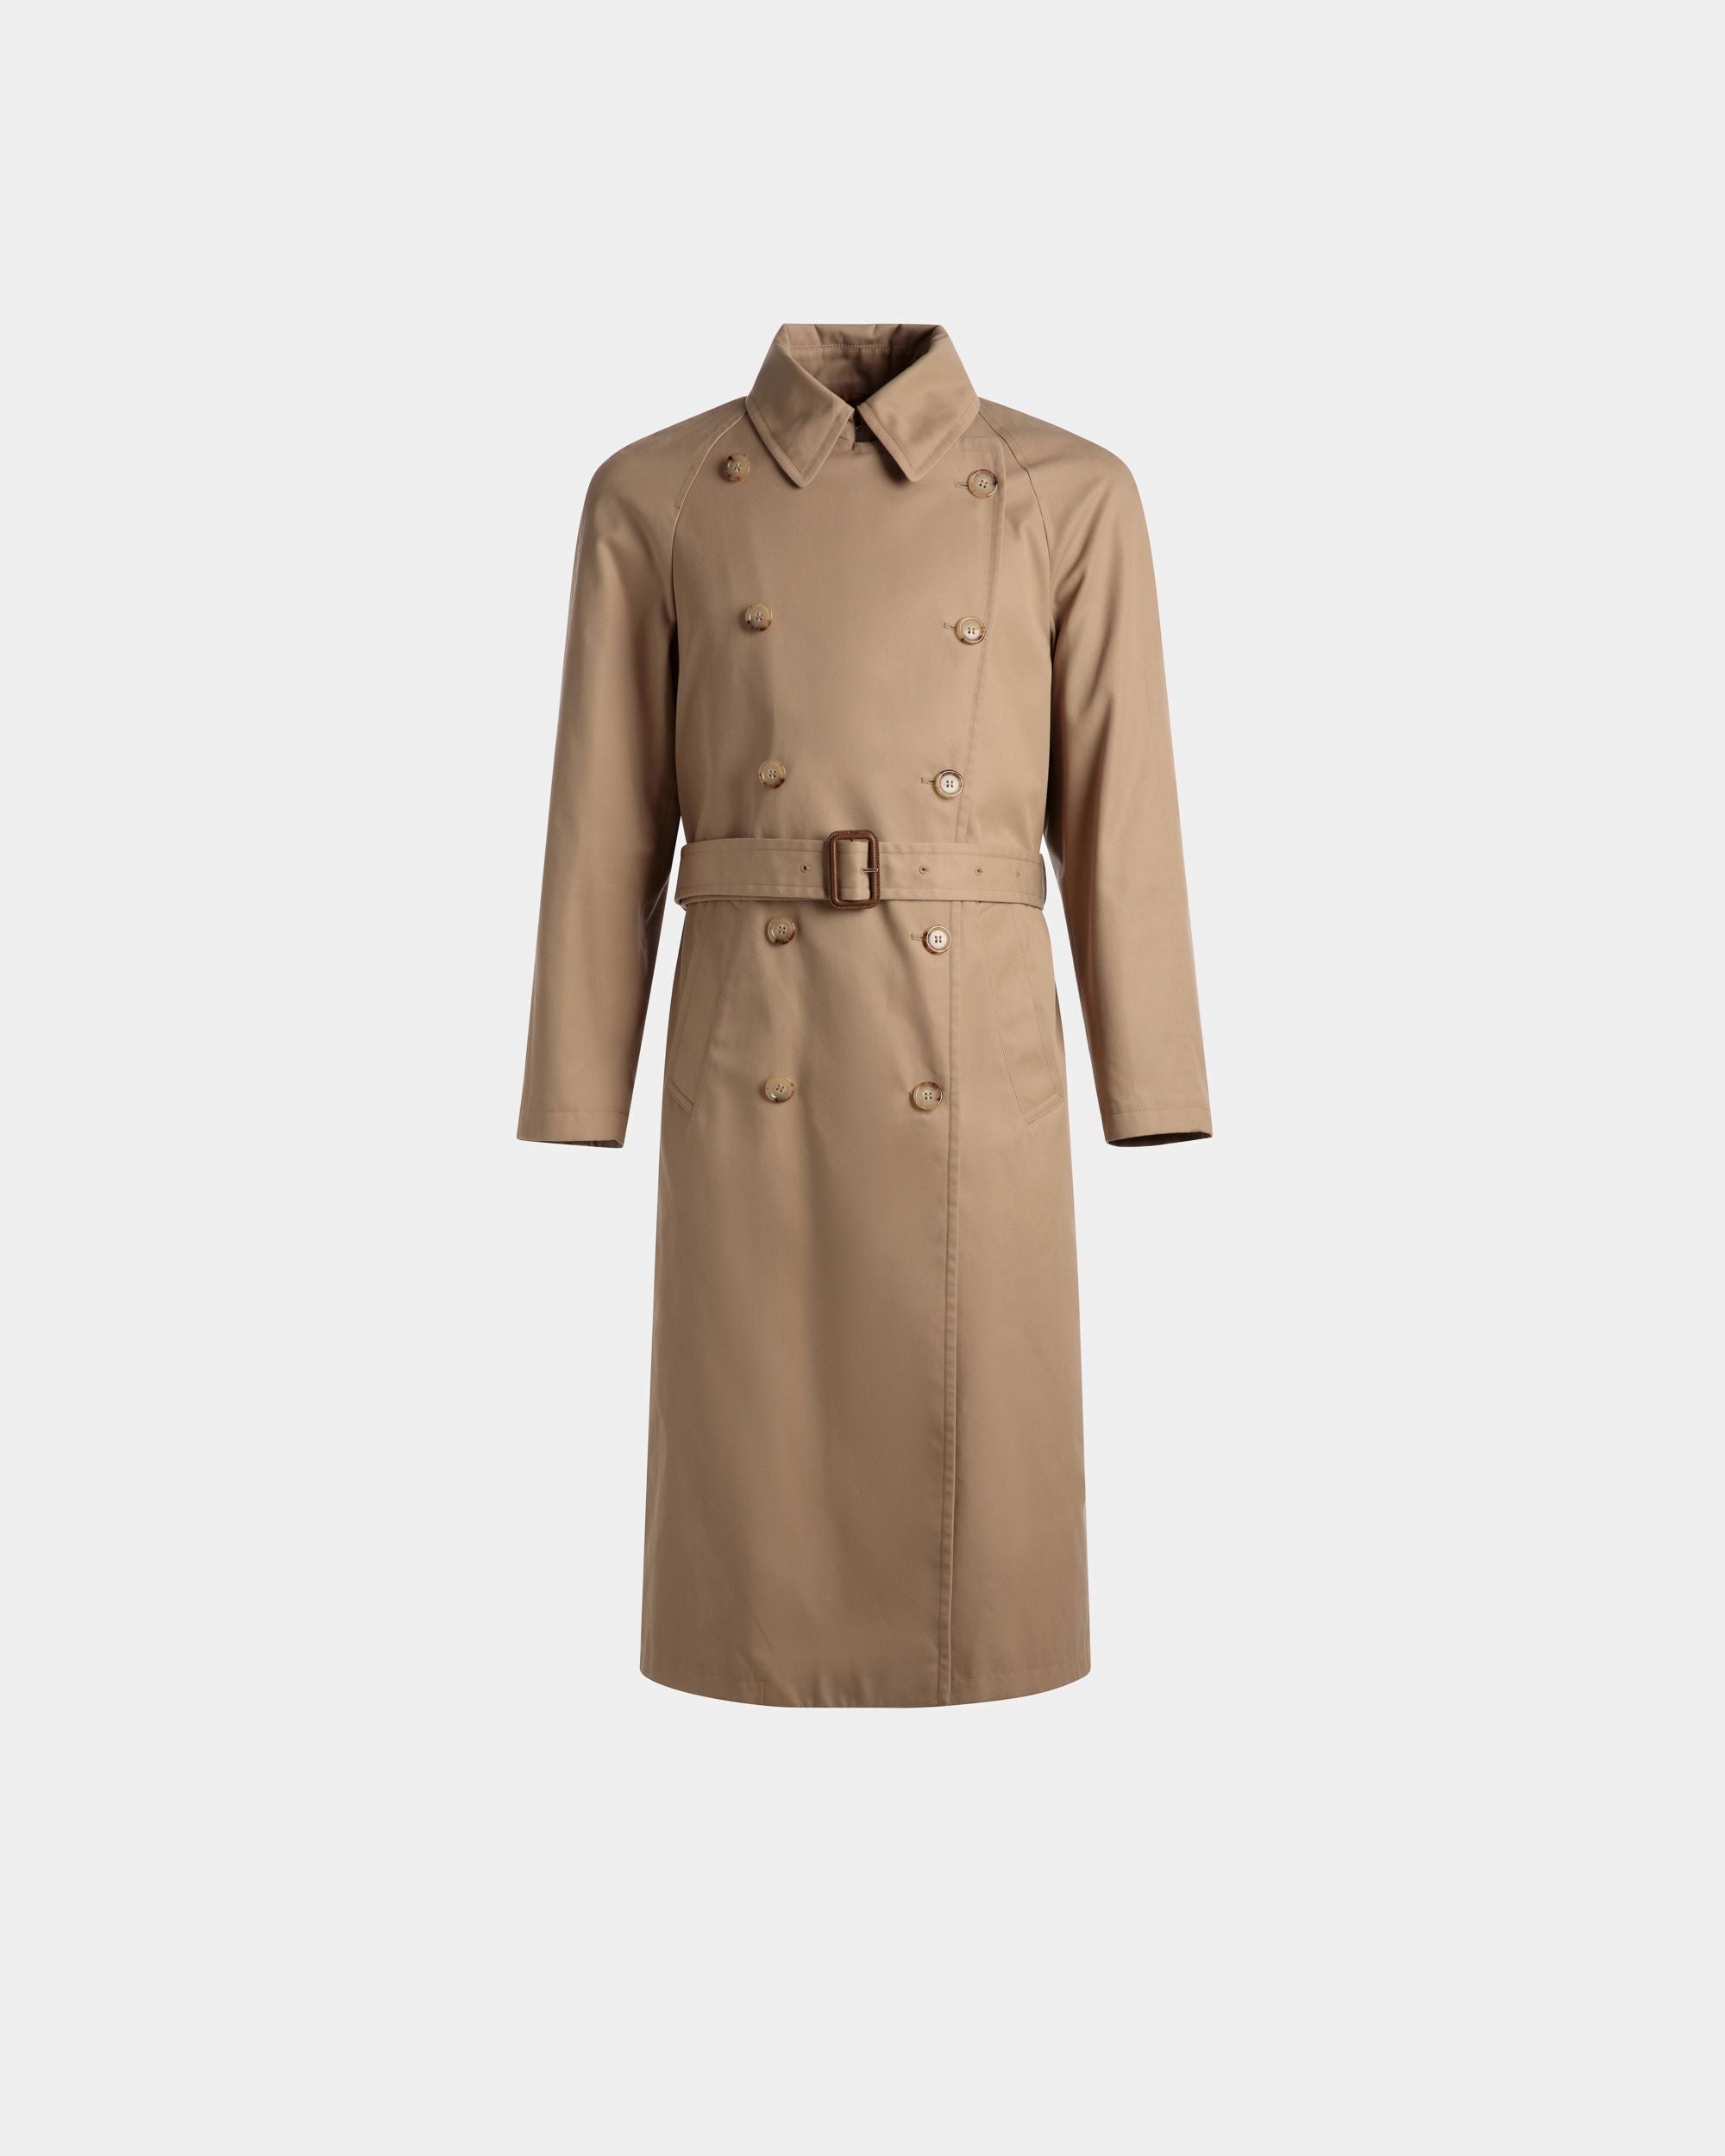 Trench Coat | Men's Outerwear | Brown Cotton | Bally | Still Life Front